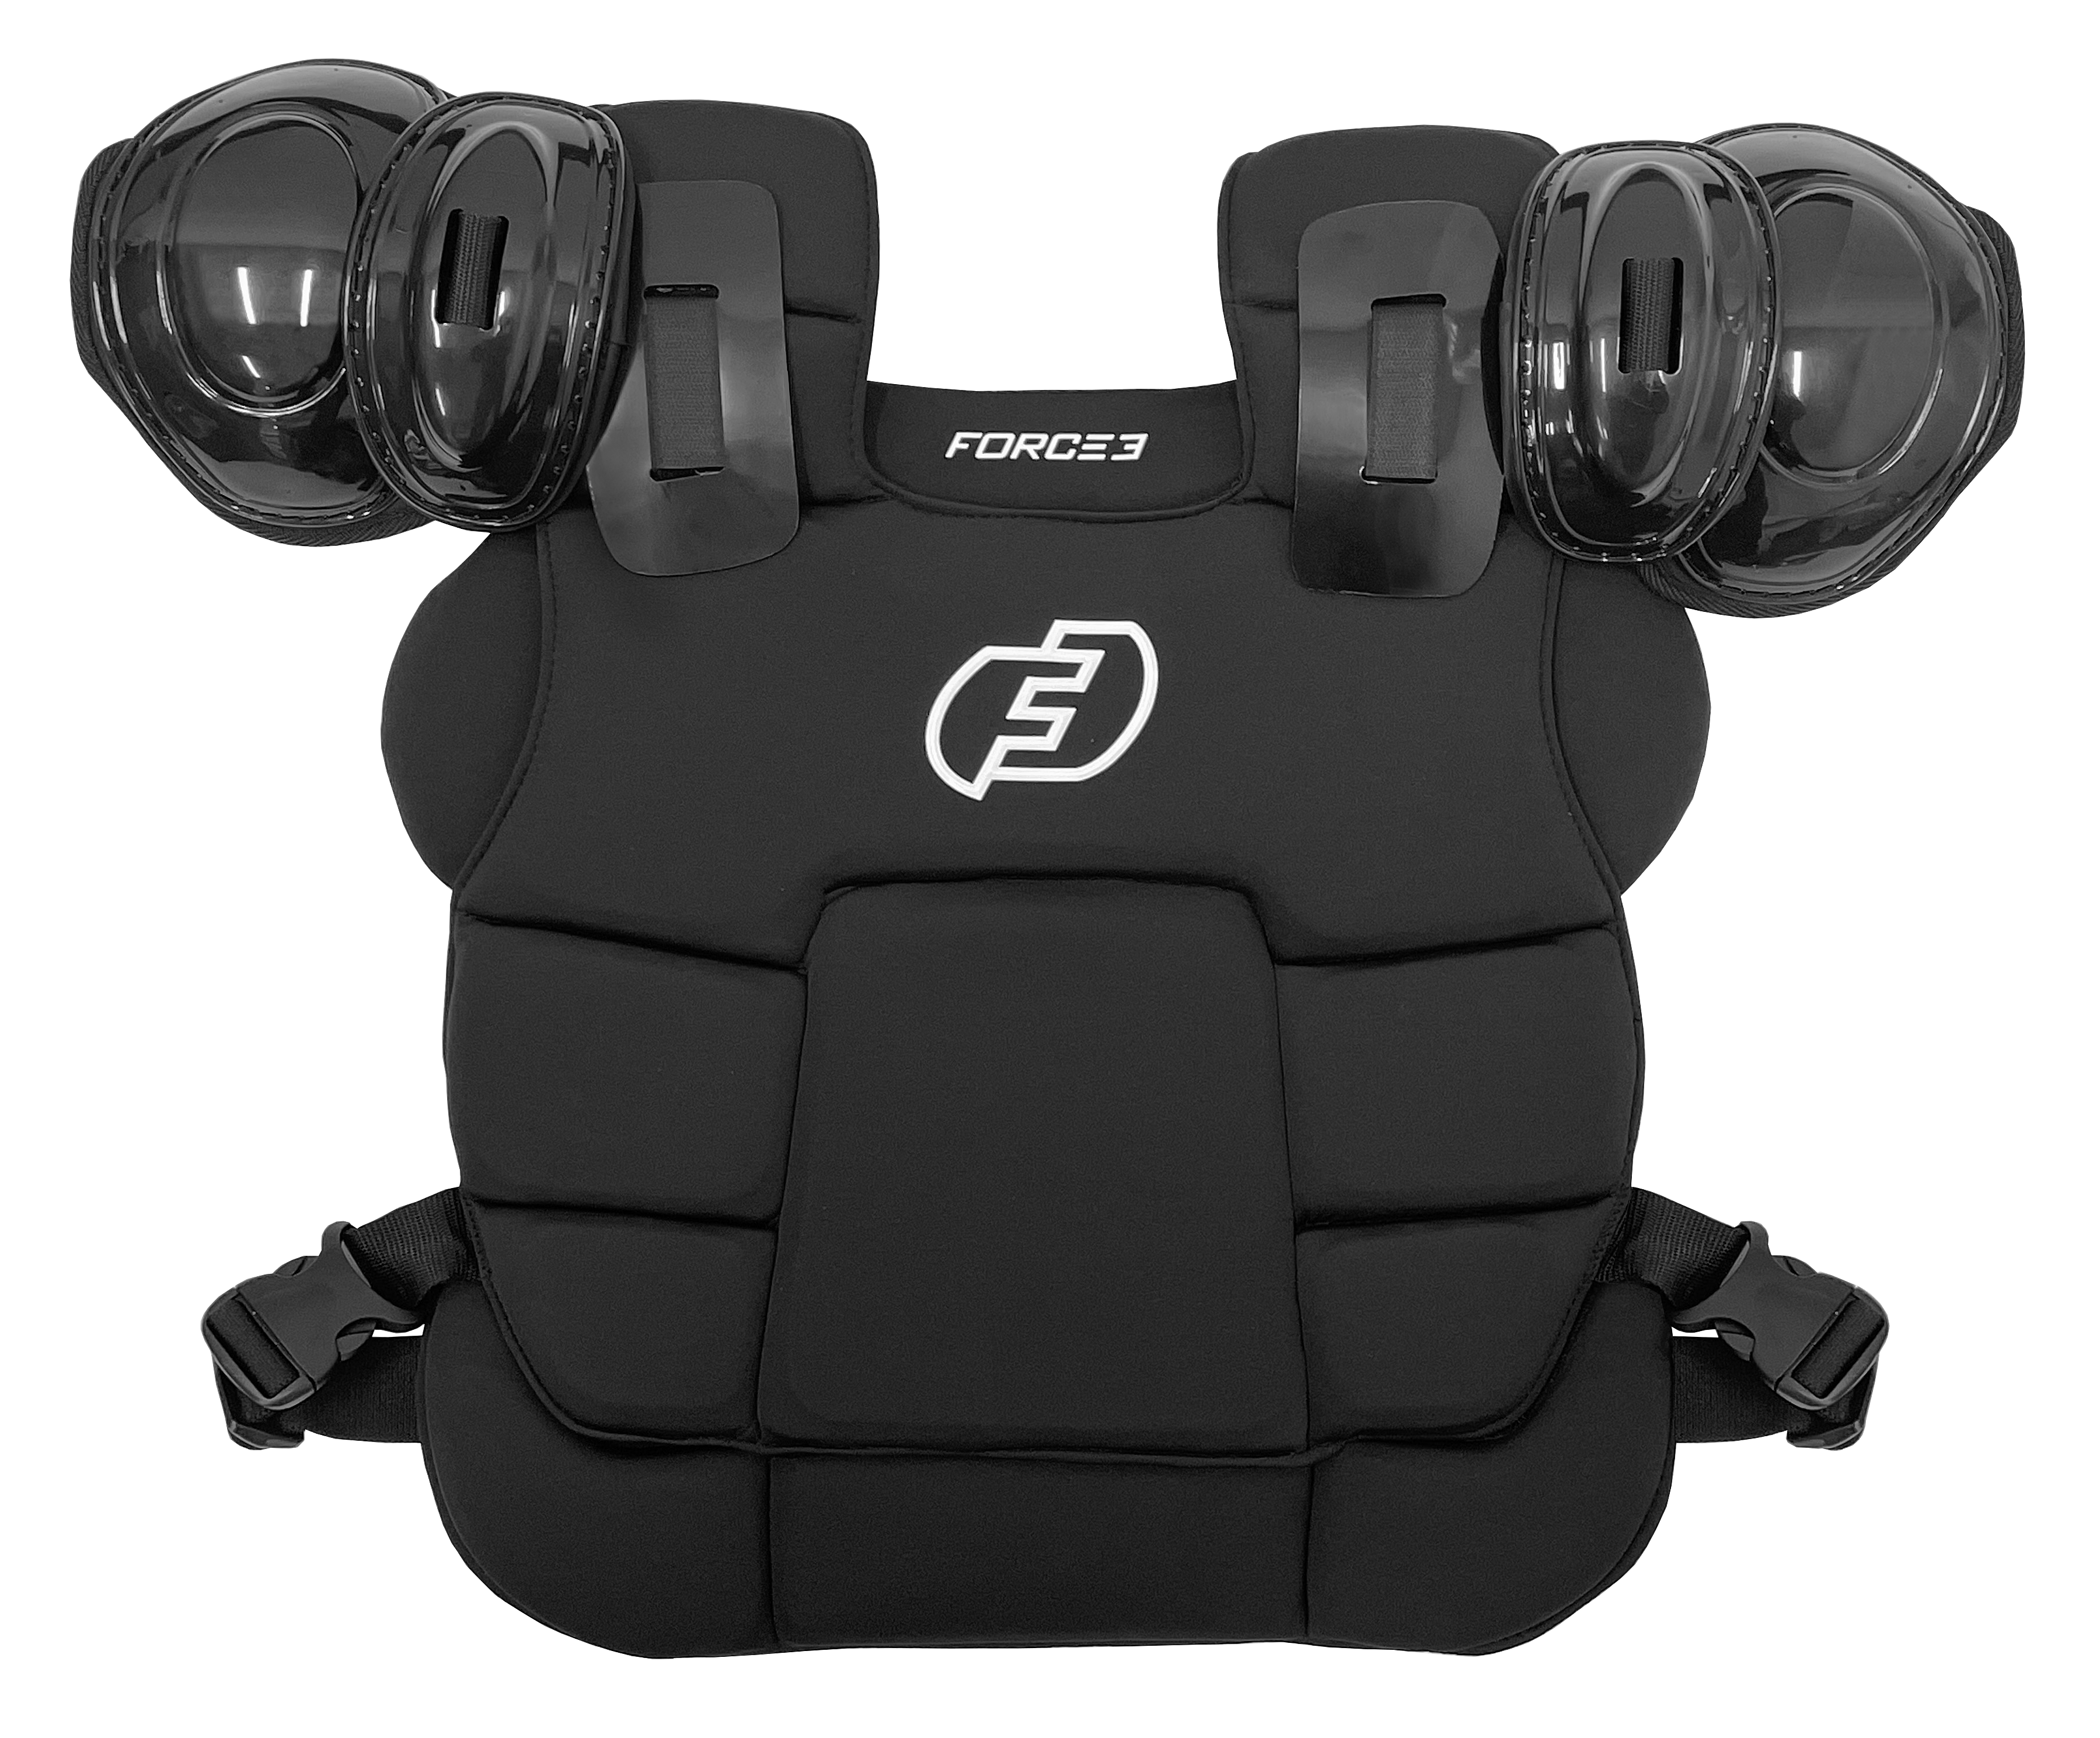 Ultimate Umpire Chest Protector with Dupont Kevlar